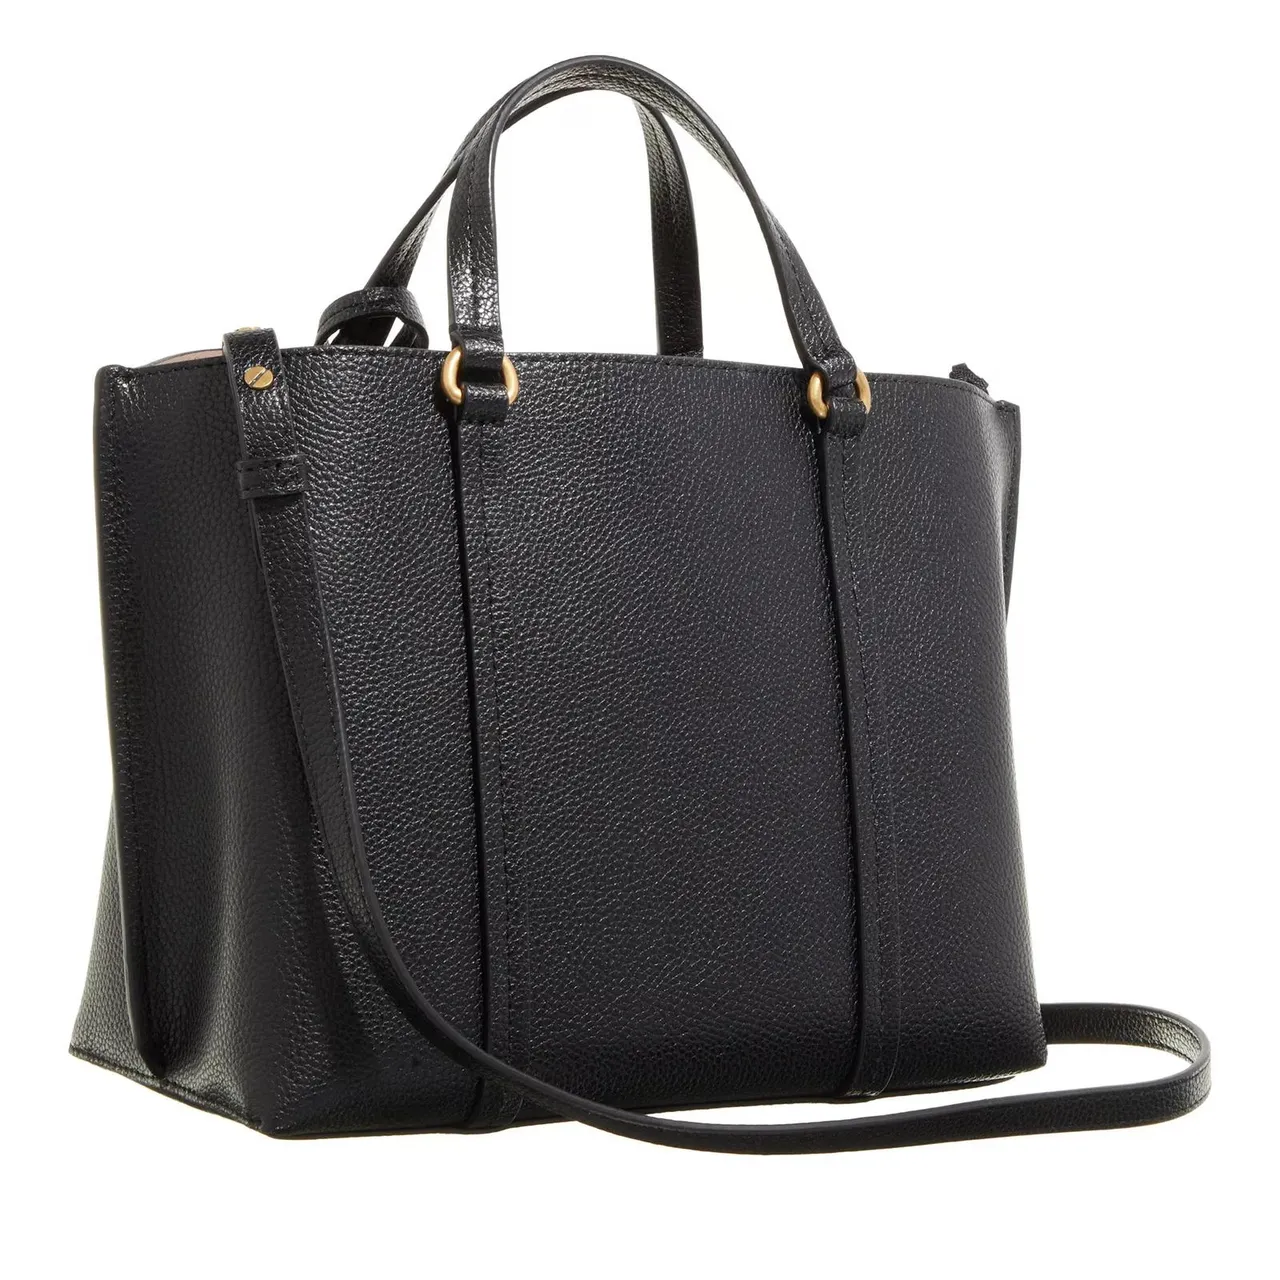 Pinko Tote Bags - Carrie Shopper Classic - black - Tote Bags for ladies